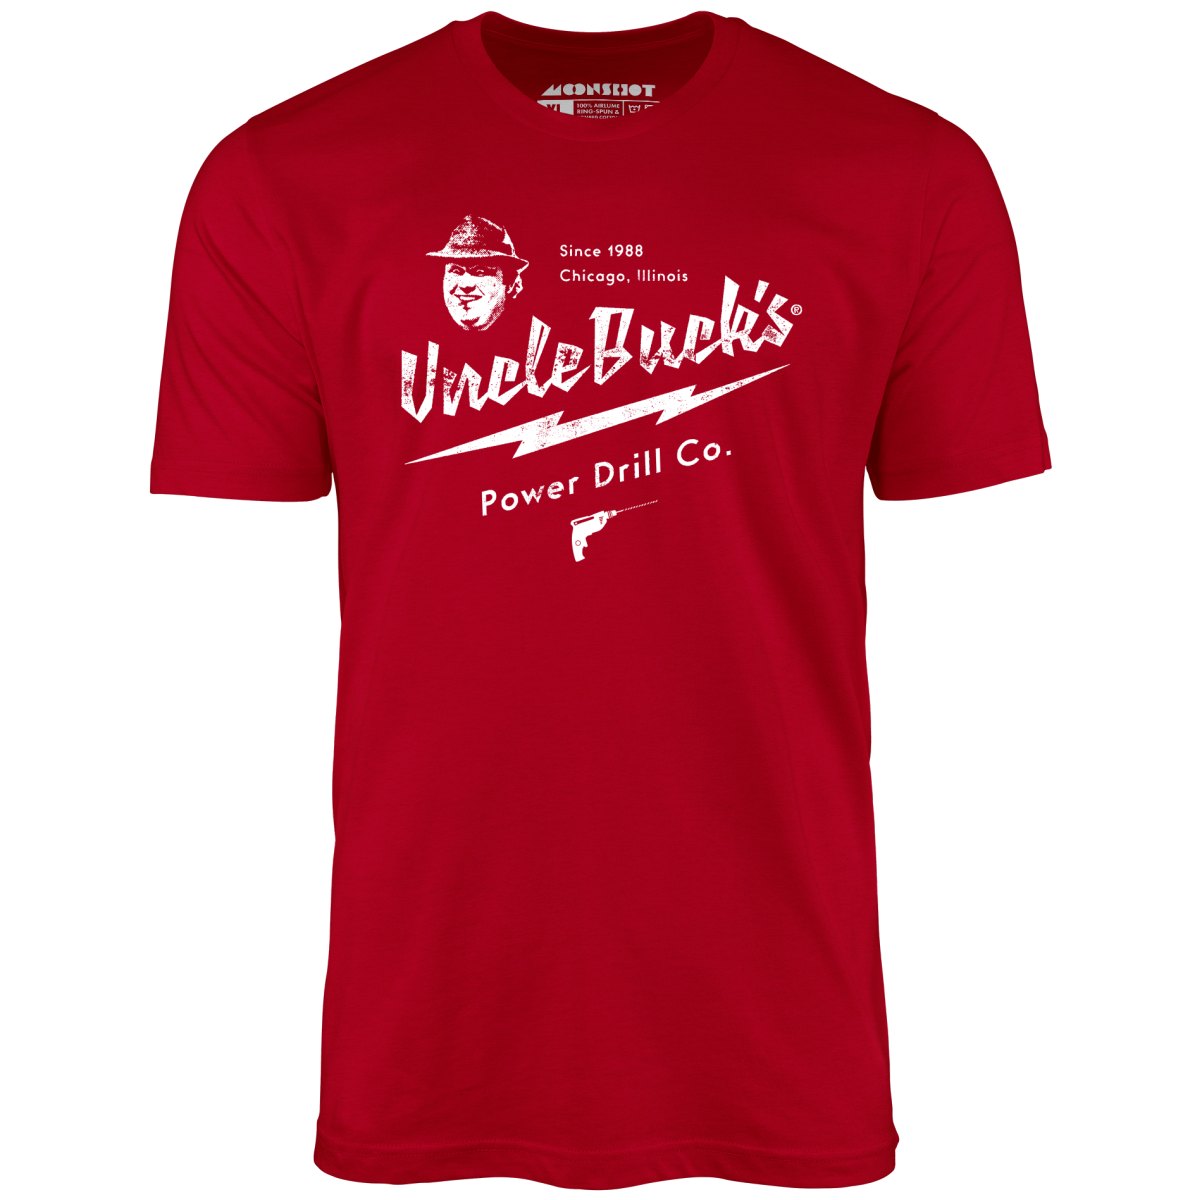 Uncle Buck's Power Drill Co. - Unisex T-Shirt